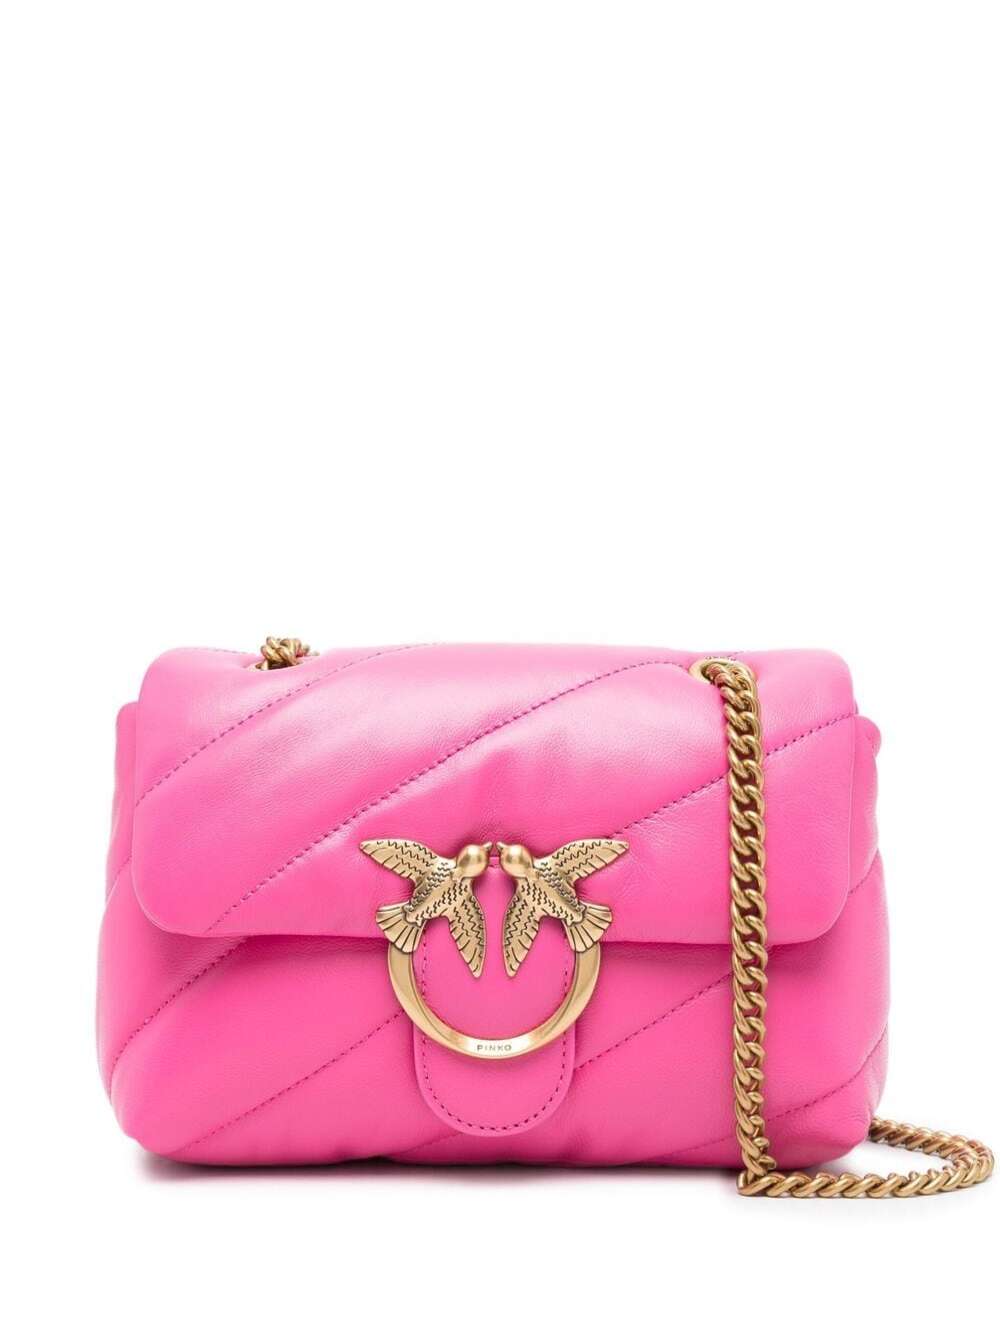 Pinko Shocking Pink Shoulder Bag In Sheep Nappa, Diagonal Quilted Processing, Gold Chain Shoulder Strap And Buckle With Logo, Dimensions: 21x15x9.5.